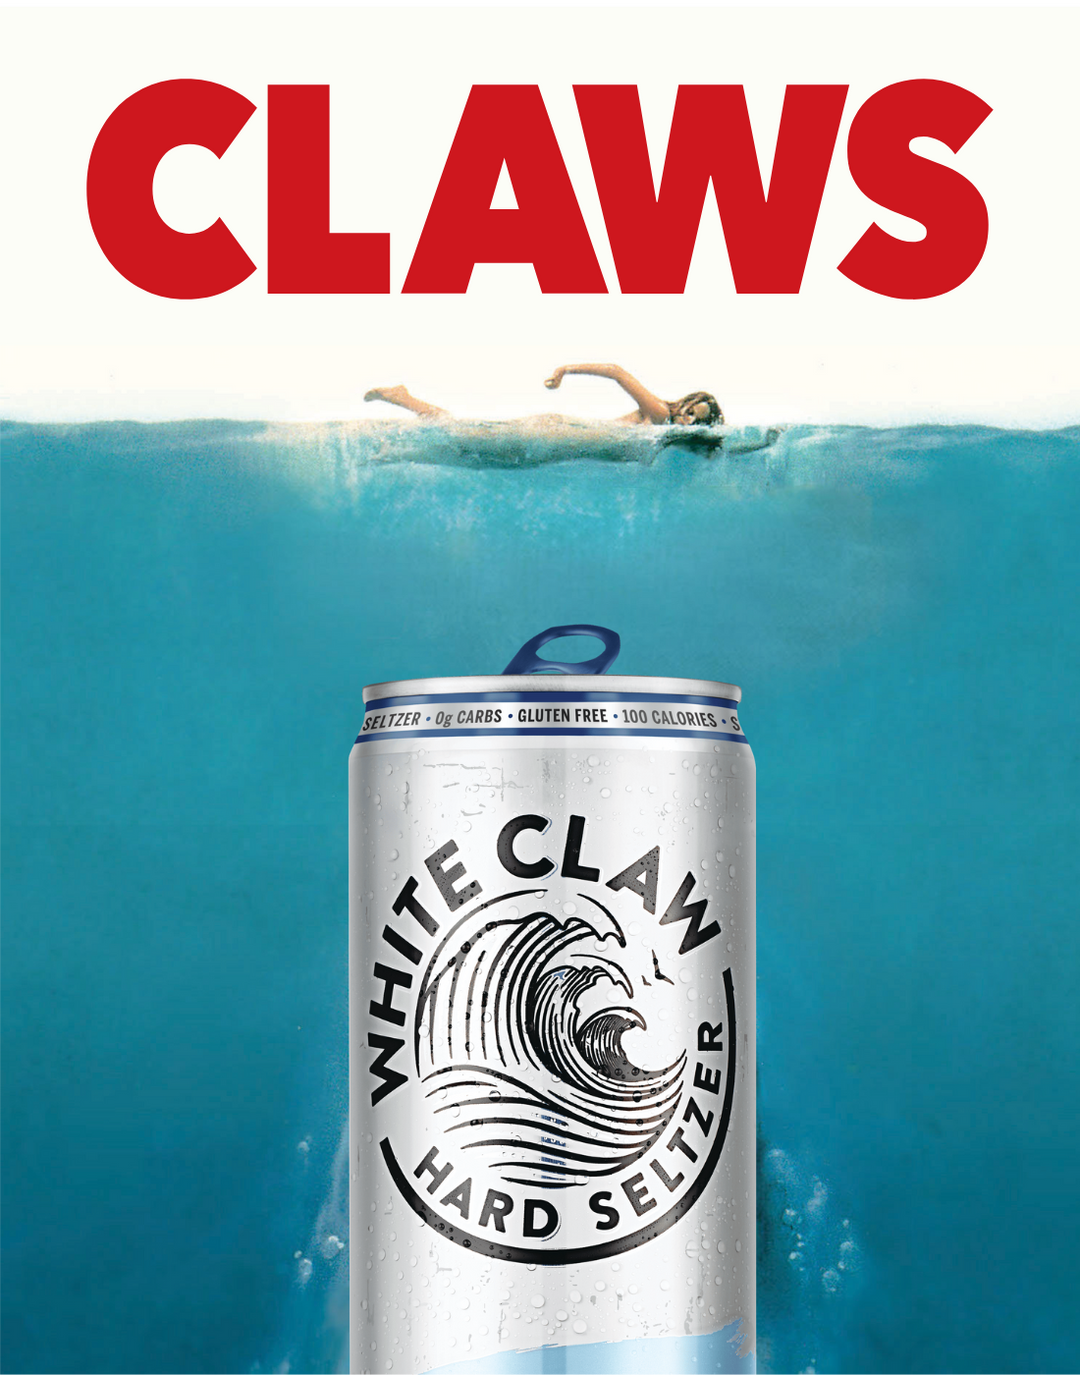 CLAWS POSTER IN MULTIPLE COLORS - PosterFi